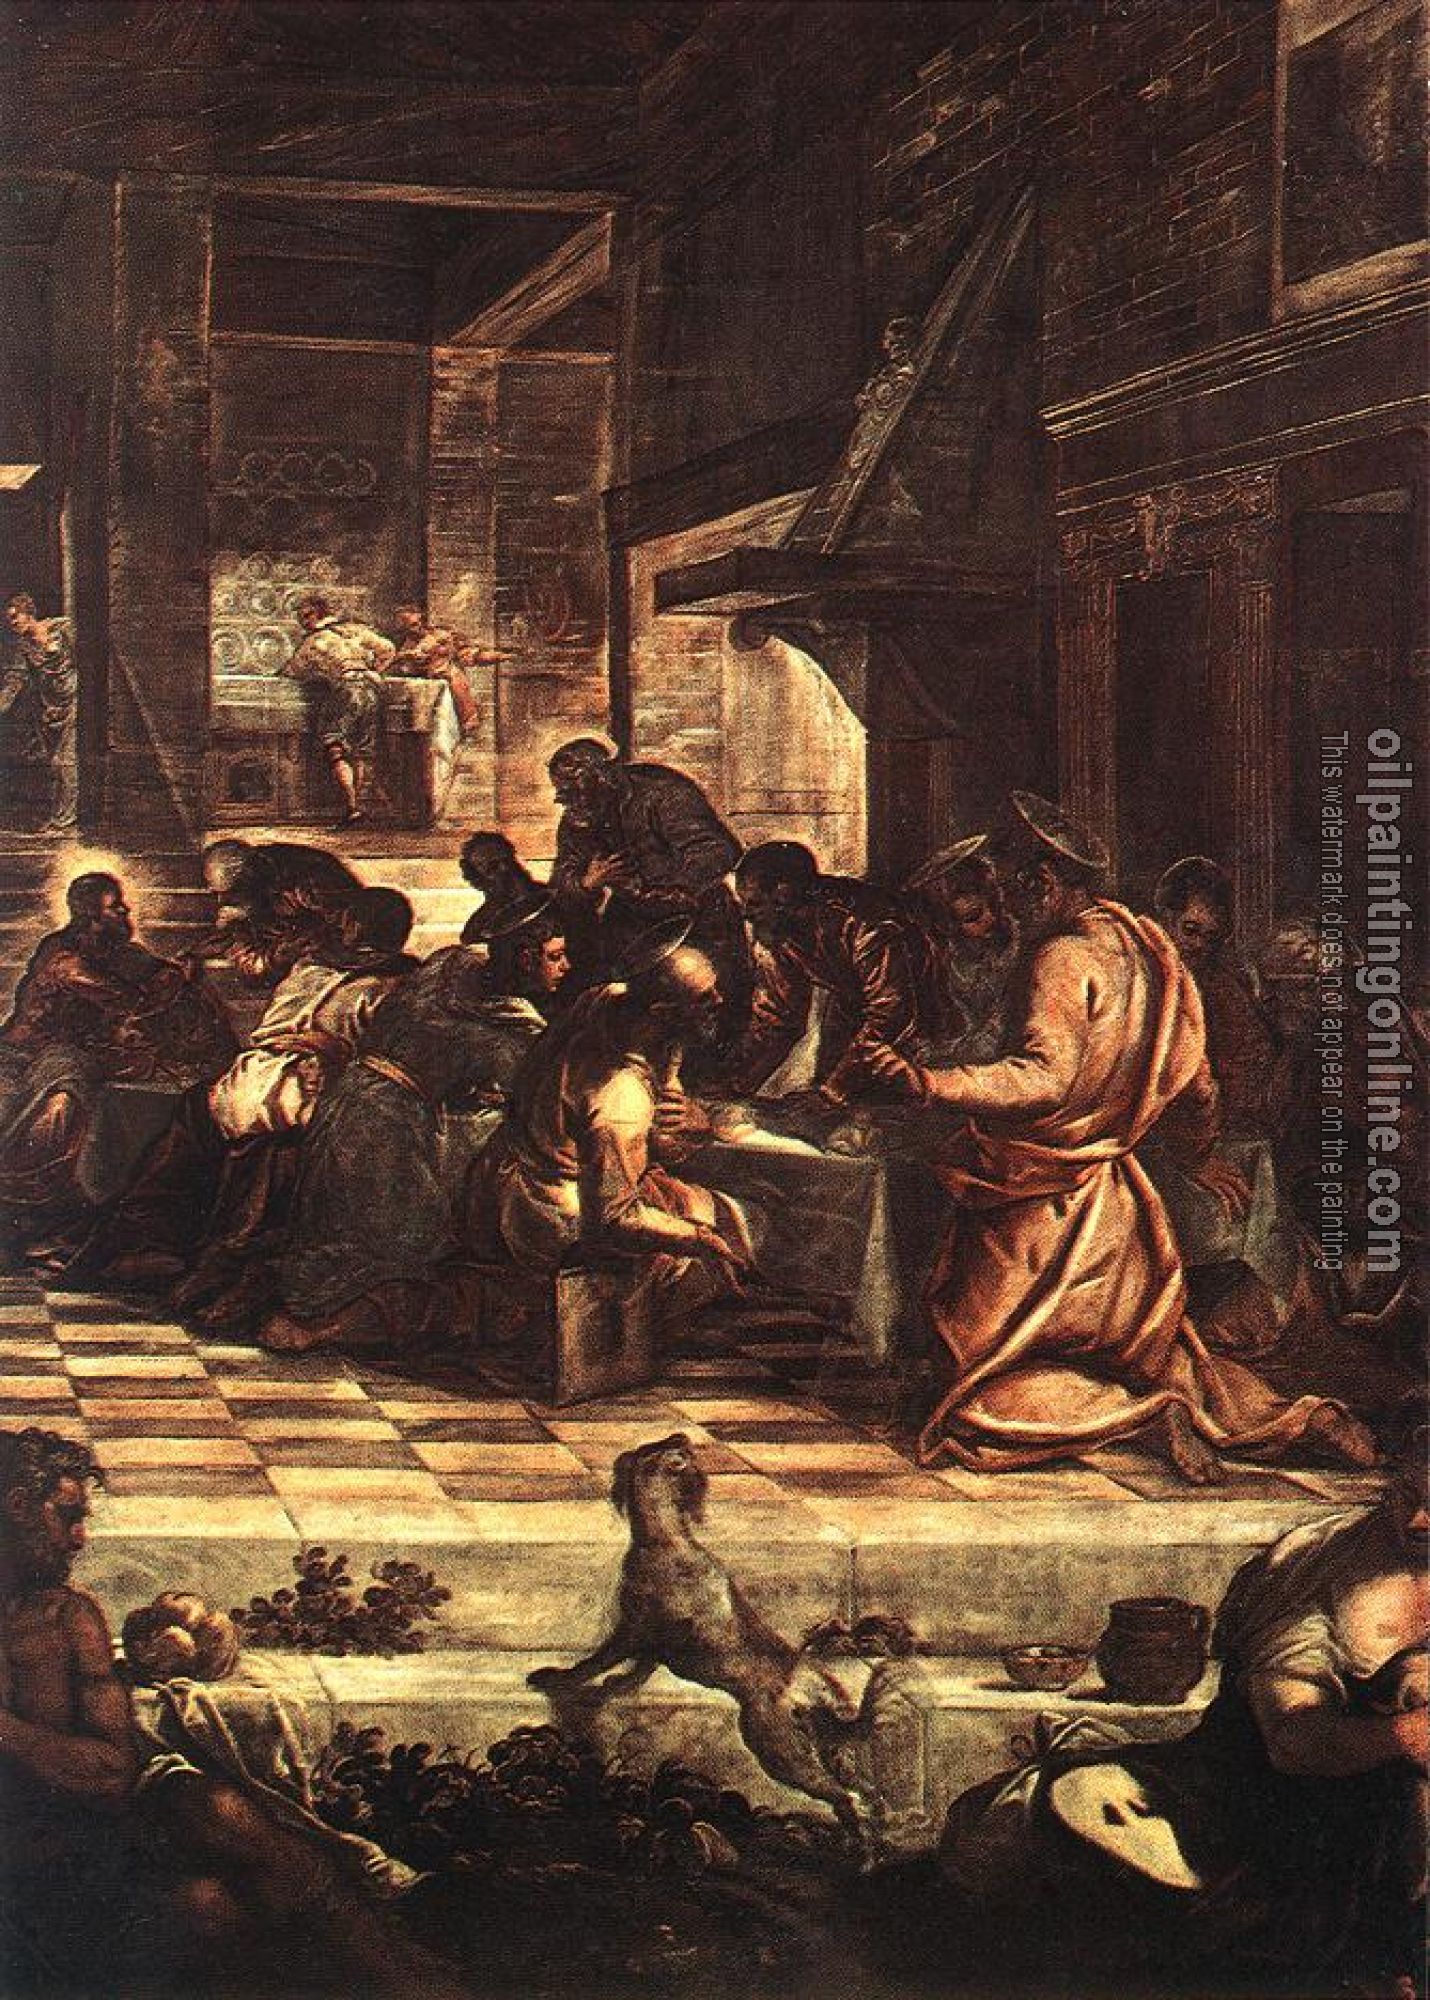 Jacopo Robusti Tintoretto - The Last Supper detail